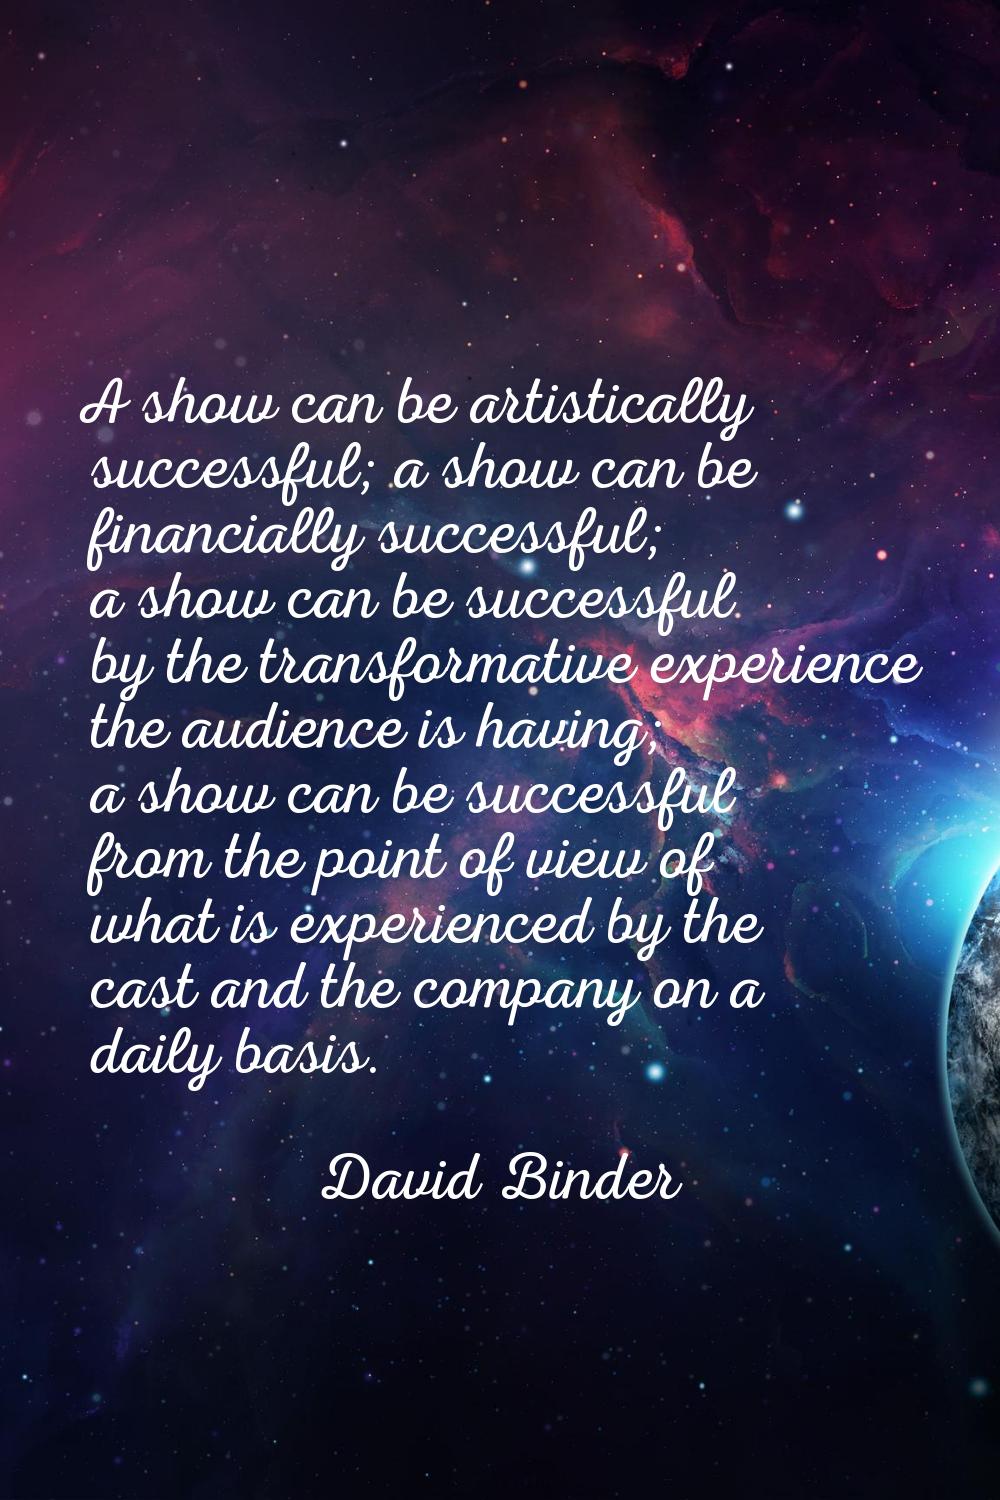 A show can be artistically successful; a show can be financially successful; a show can be successf